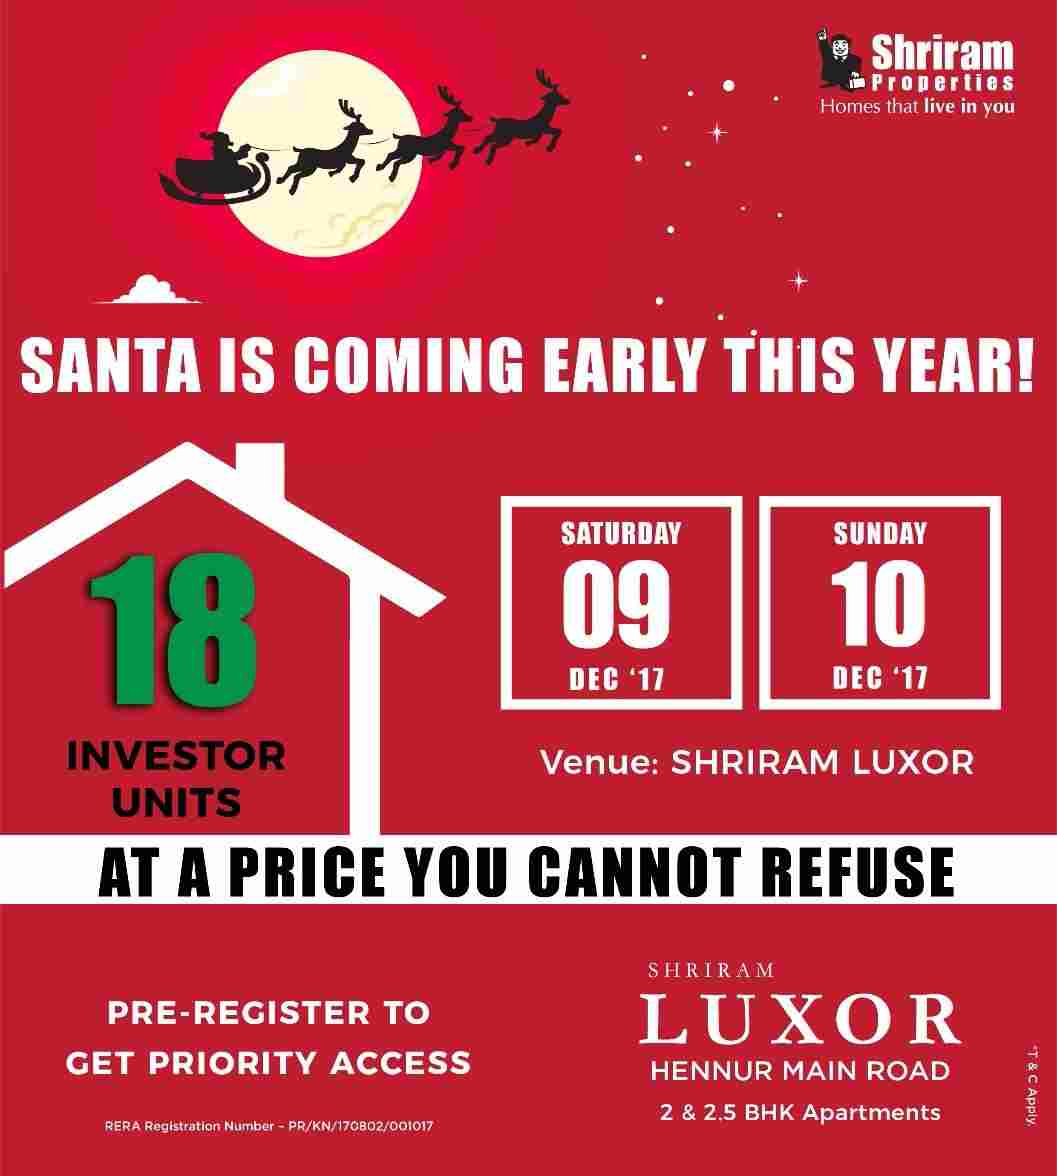 Santa is coming early this year at Shriram Luxor in Bangalore Update